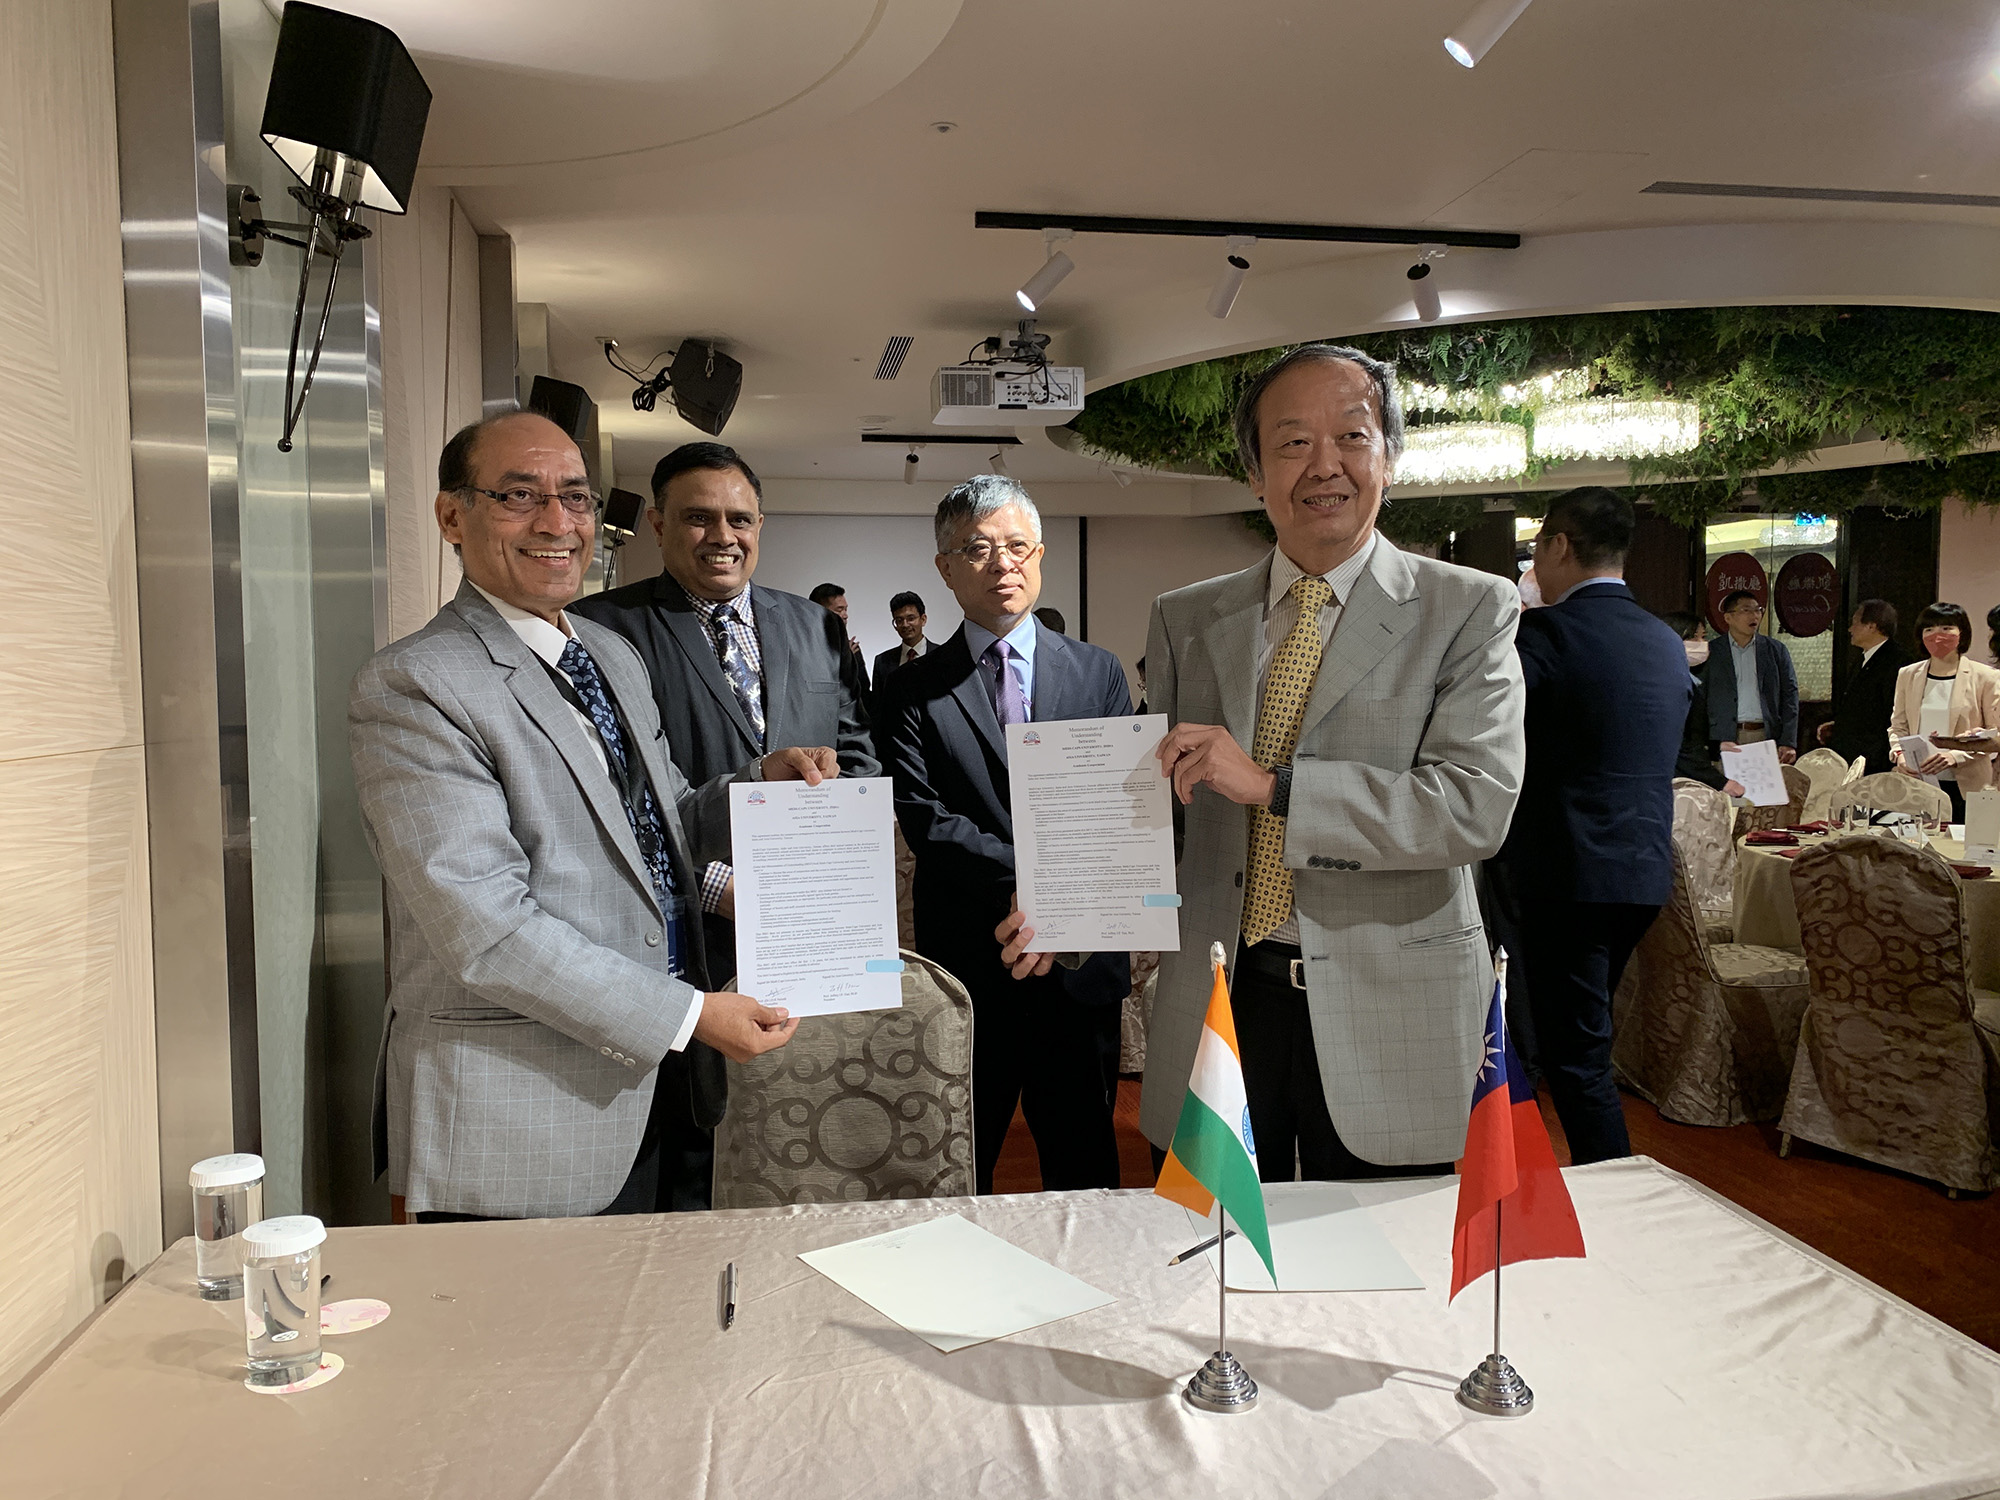 Vice President of Asia University and Dean of the College of Information and Electrical Engineering (front right), Shian-Shyong Tseng, signs the MOU with the President of Medi-Caps University, Prof. Dilip K. Patnaik (front left). The signing ceremony is witnessed by Deputy of the Ministry of Education, Mon-Chi Lio (back right) and Professor Tarak of the All India Council for Technical Education (back left)